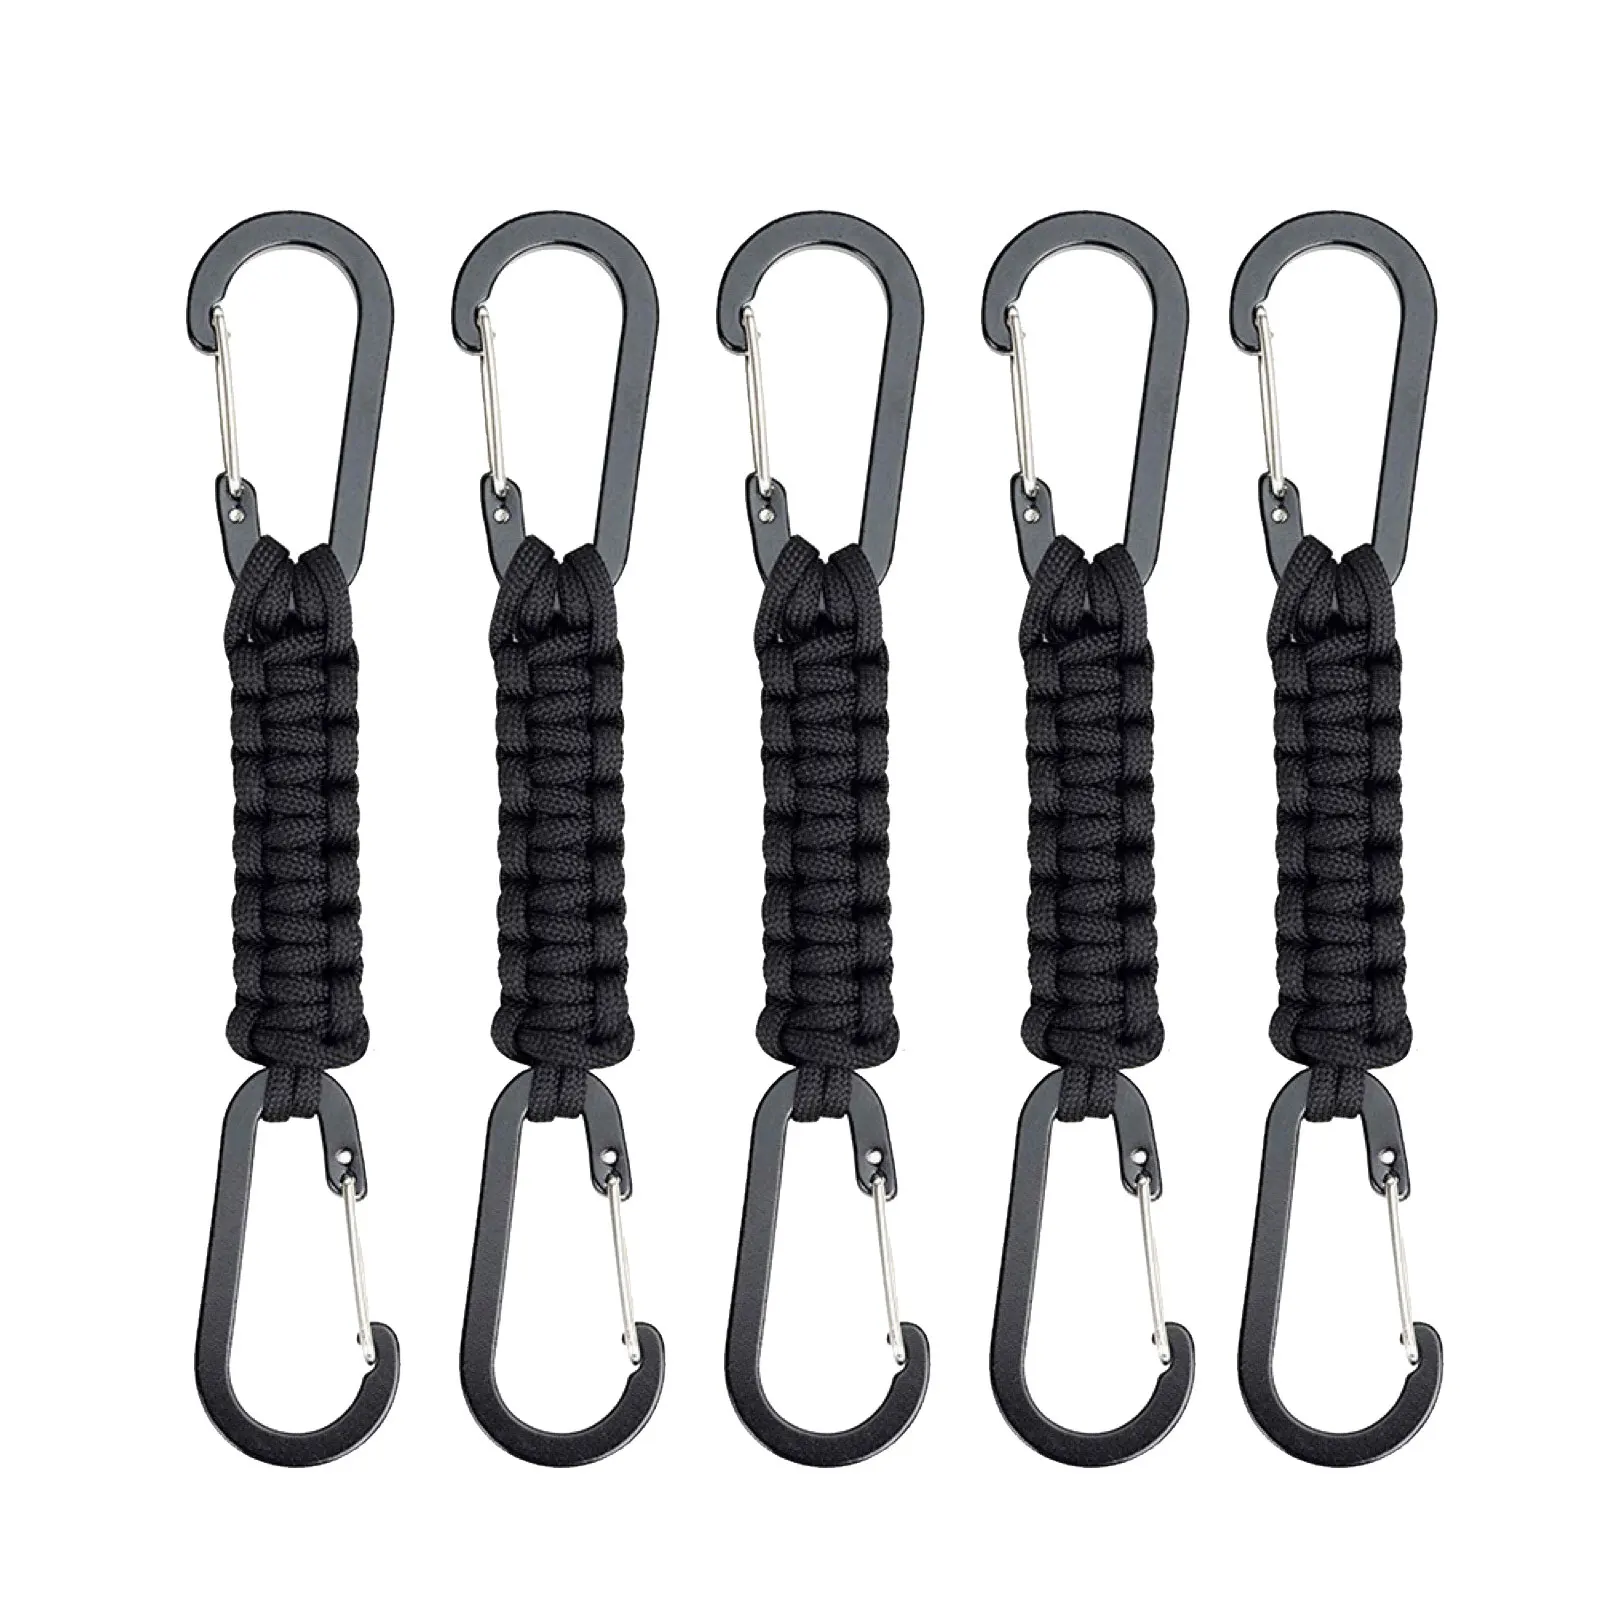 

5pcs Paracord Keychain With Carabiner Heavy Duty Camping Hiking Braided Lanyard Safety Black Backpacking Emergency Men Women